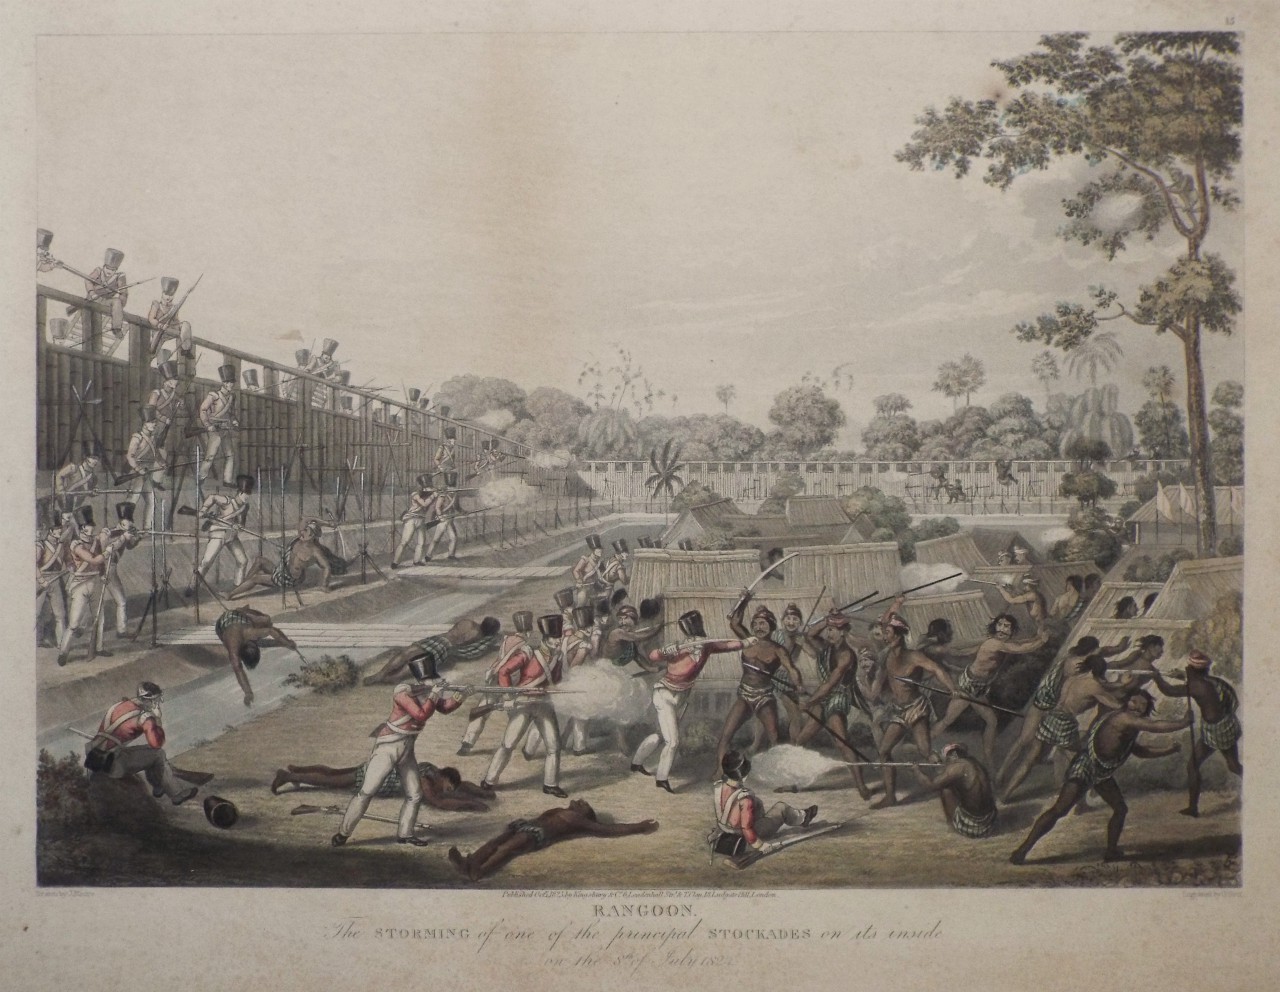 Aquatint - Rangoon. The Storming of one of the Principal Stockades on its inside on the 8th July 1824. - Hunt